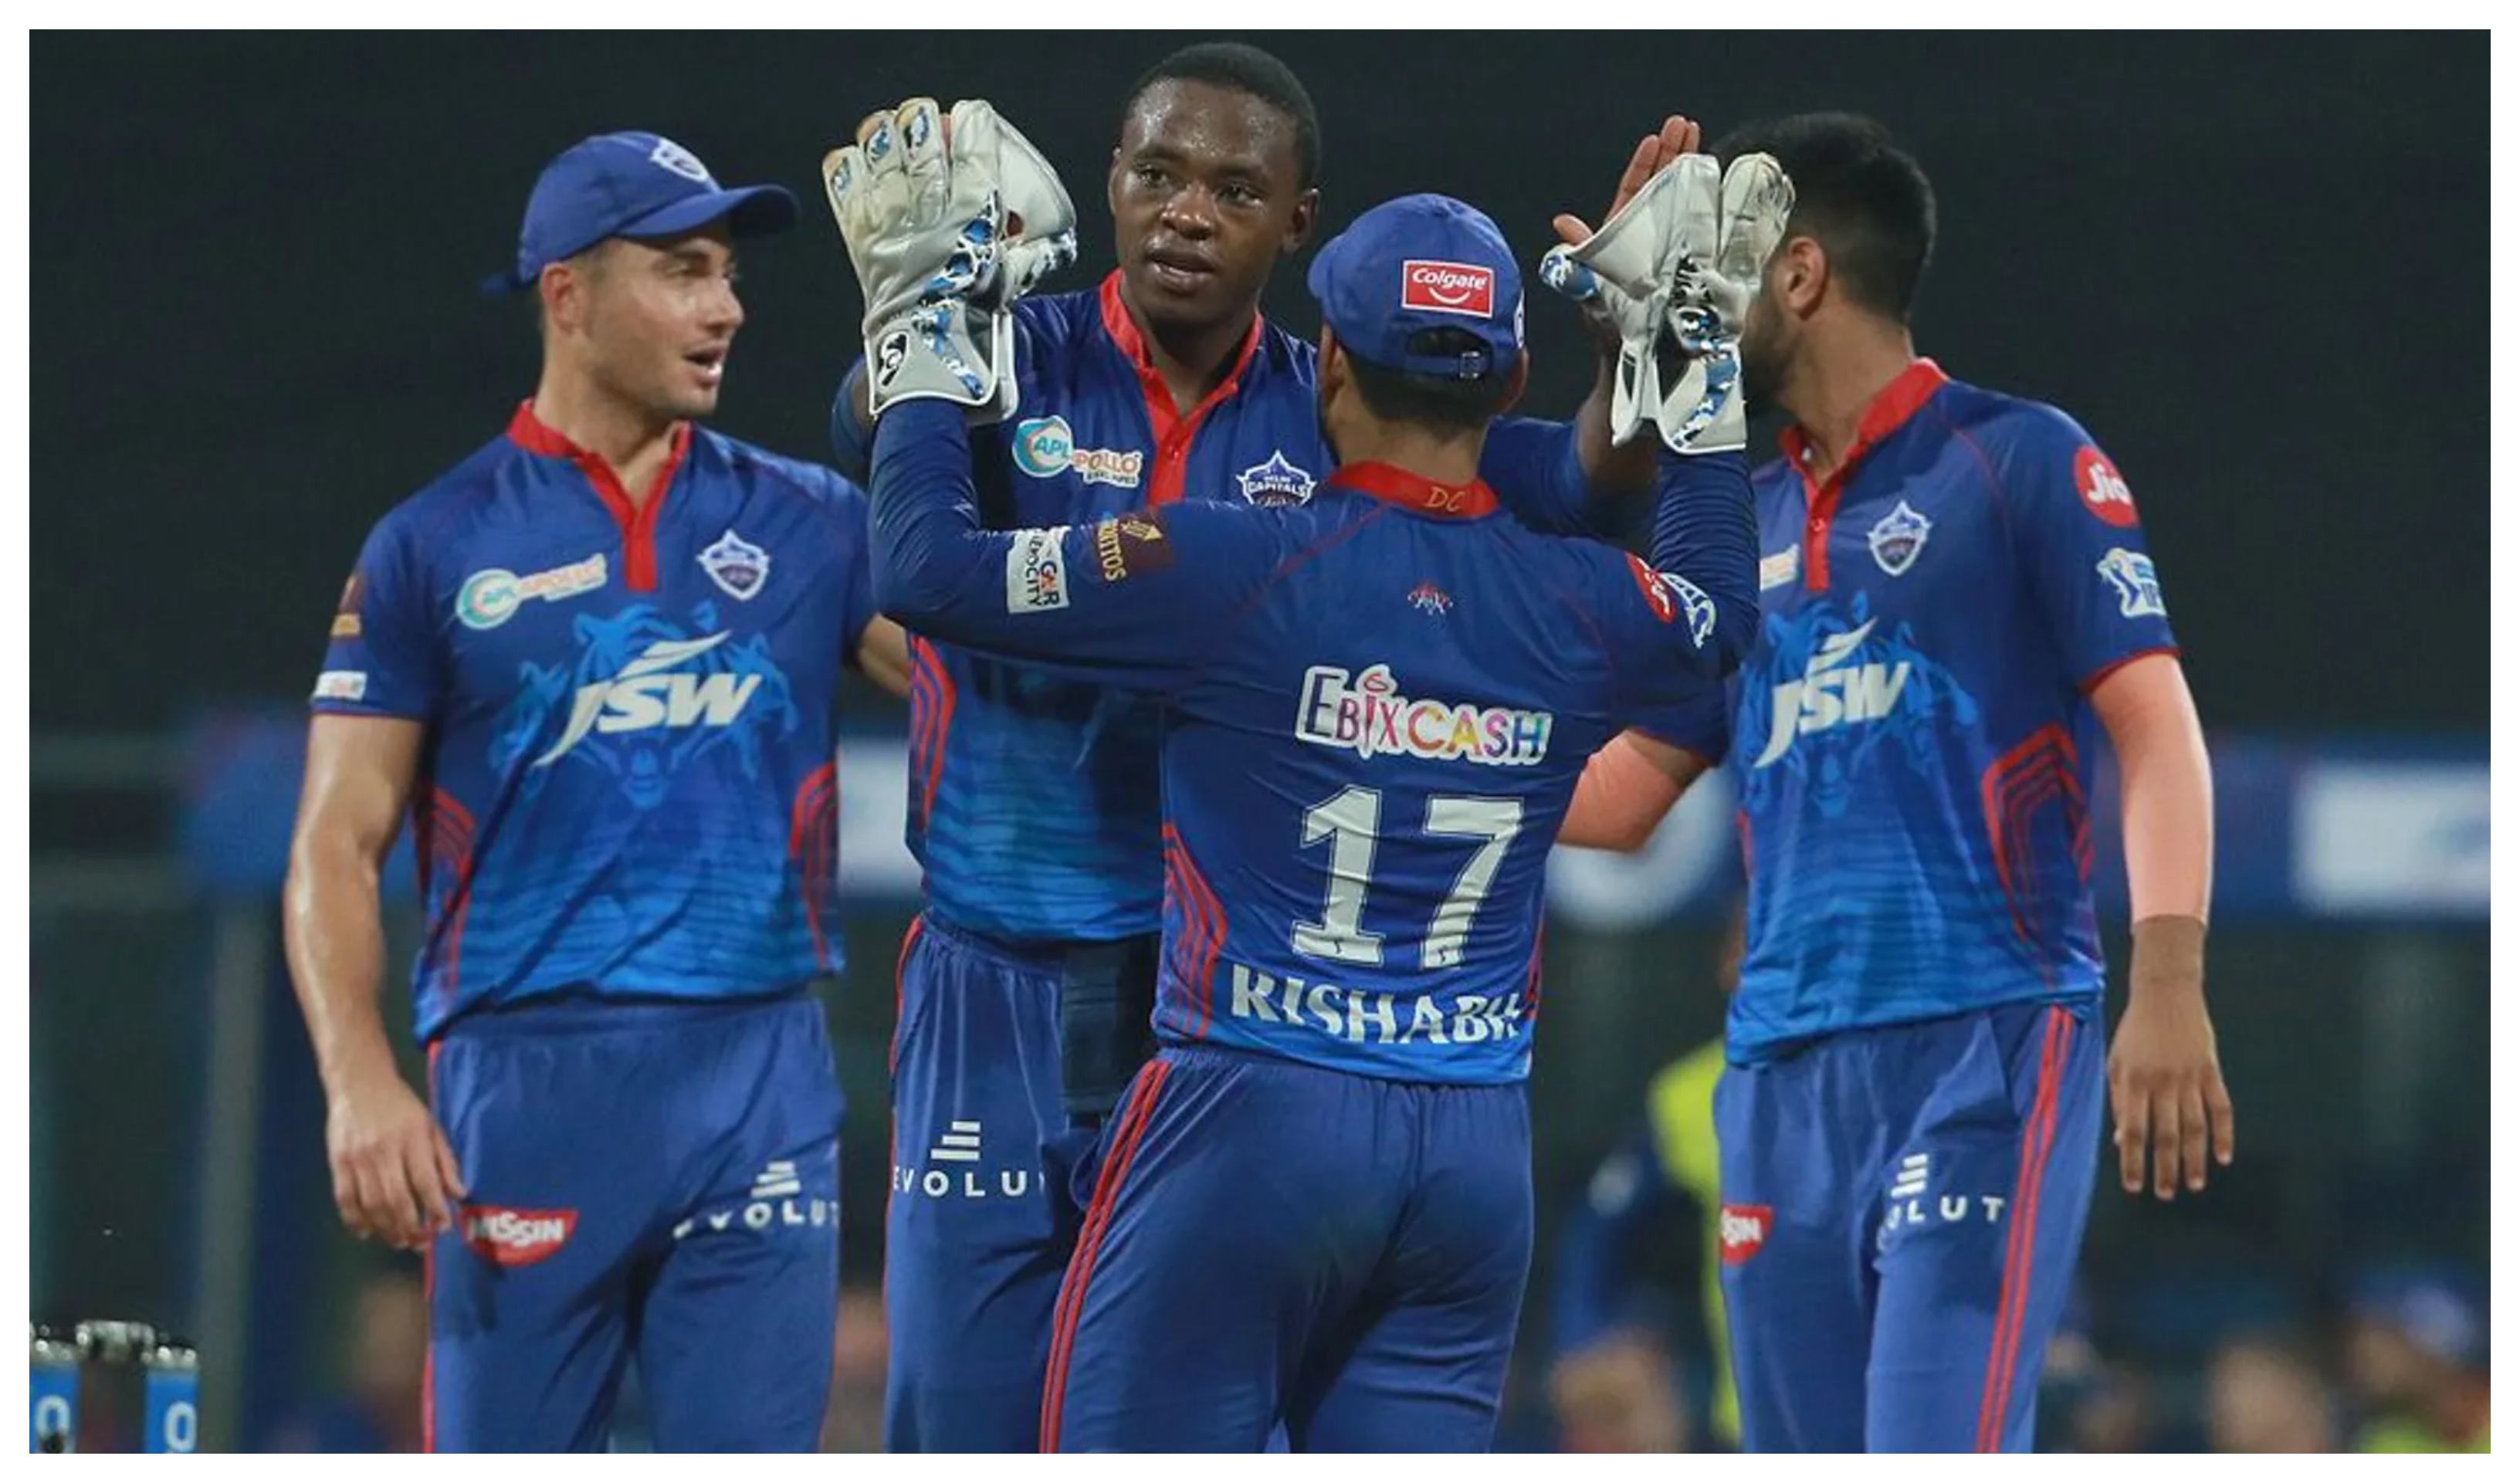 DC lost to RR in the last game | BCCI/IPL